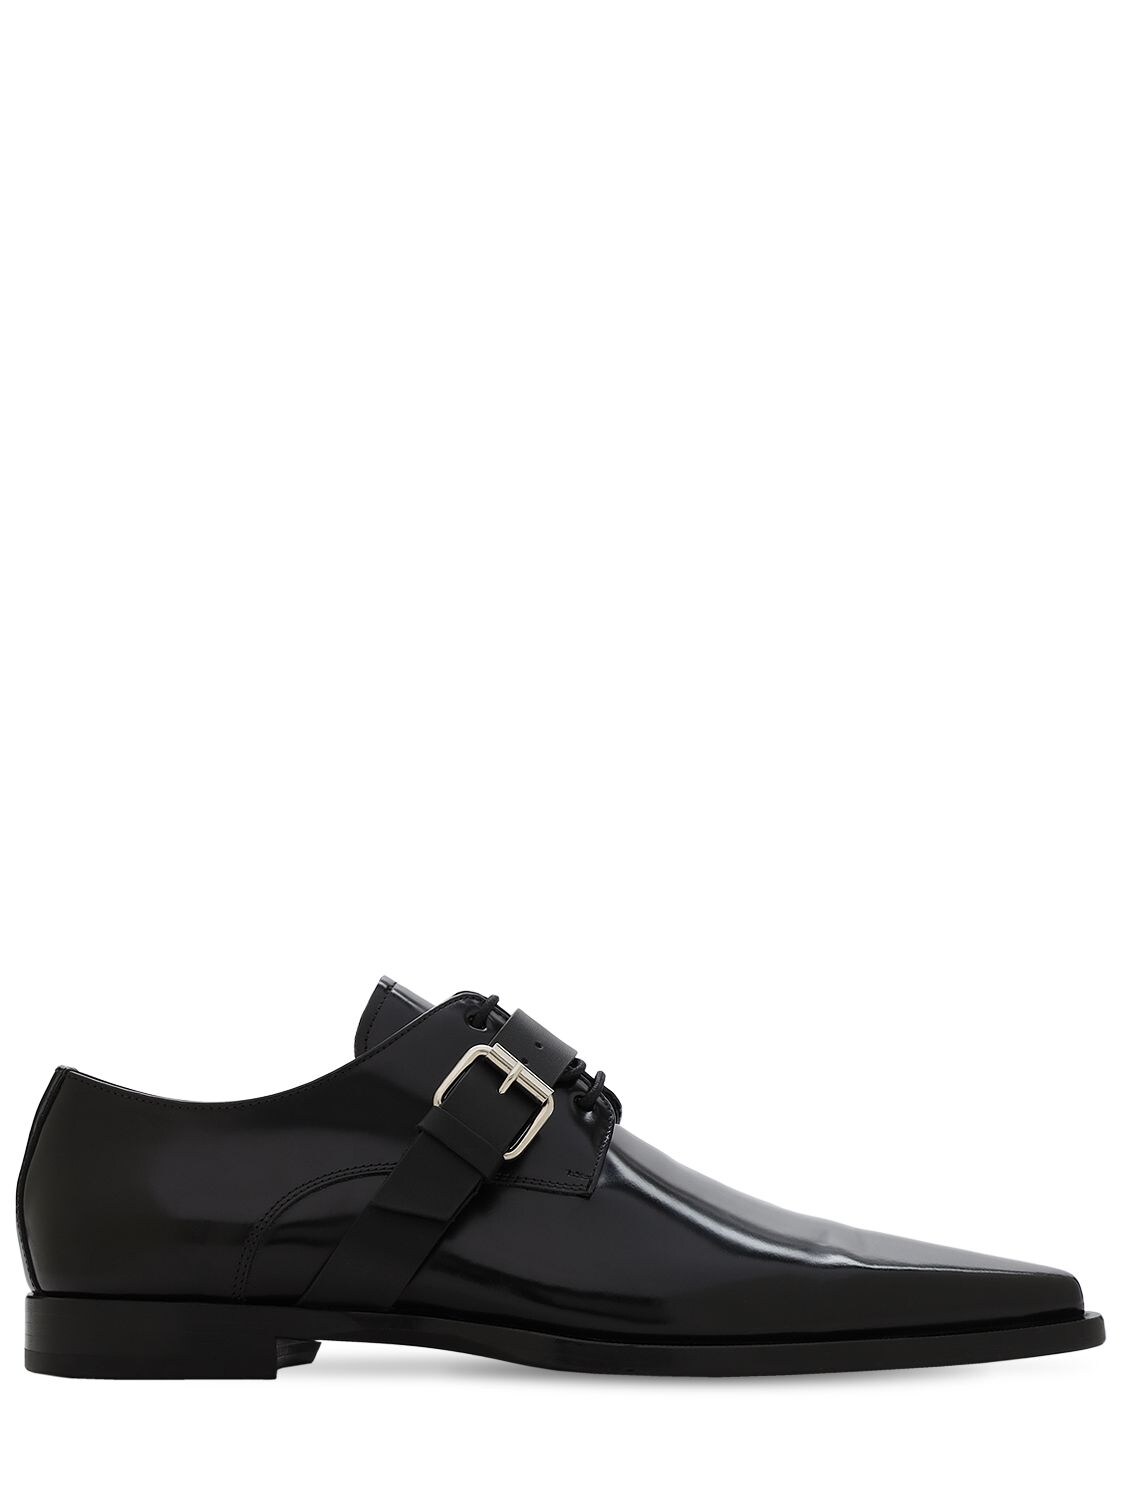 Dsquared2 Leather Lace-up Buckle Loafers In Black